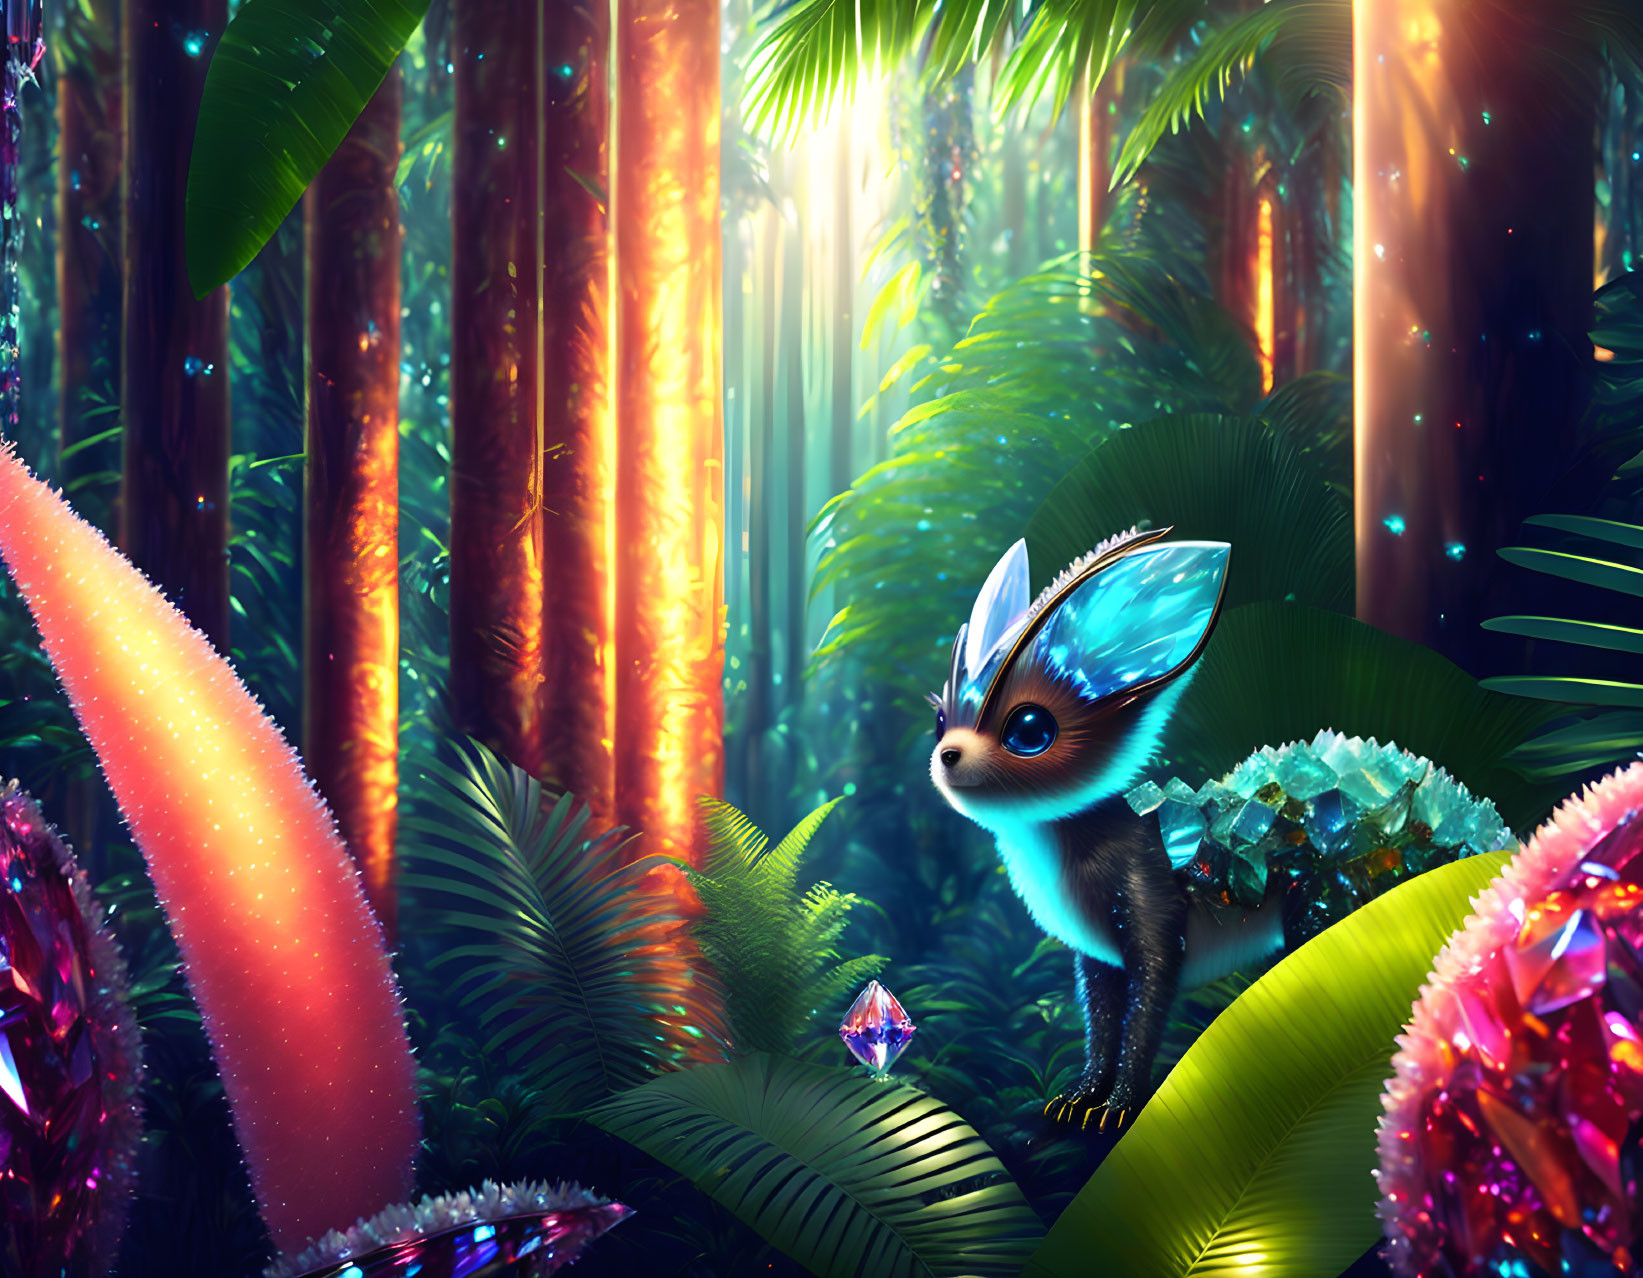 Fantastical creature with large eyes in vibrant jungle with crystal formations